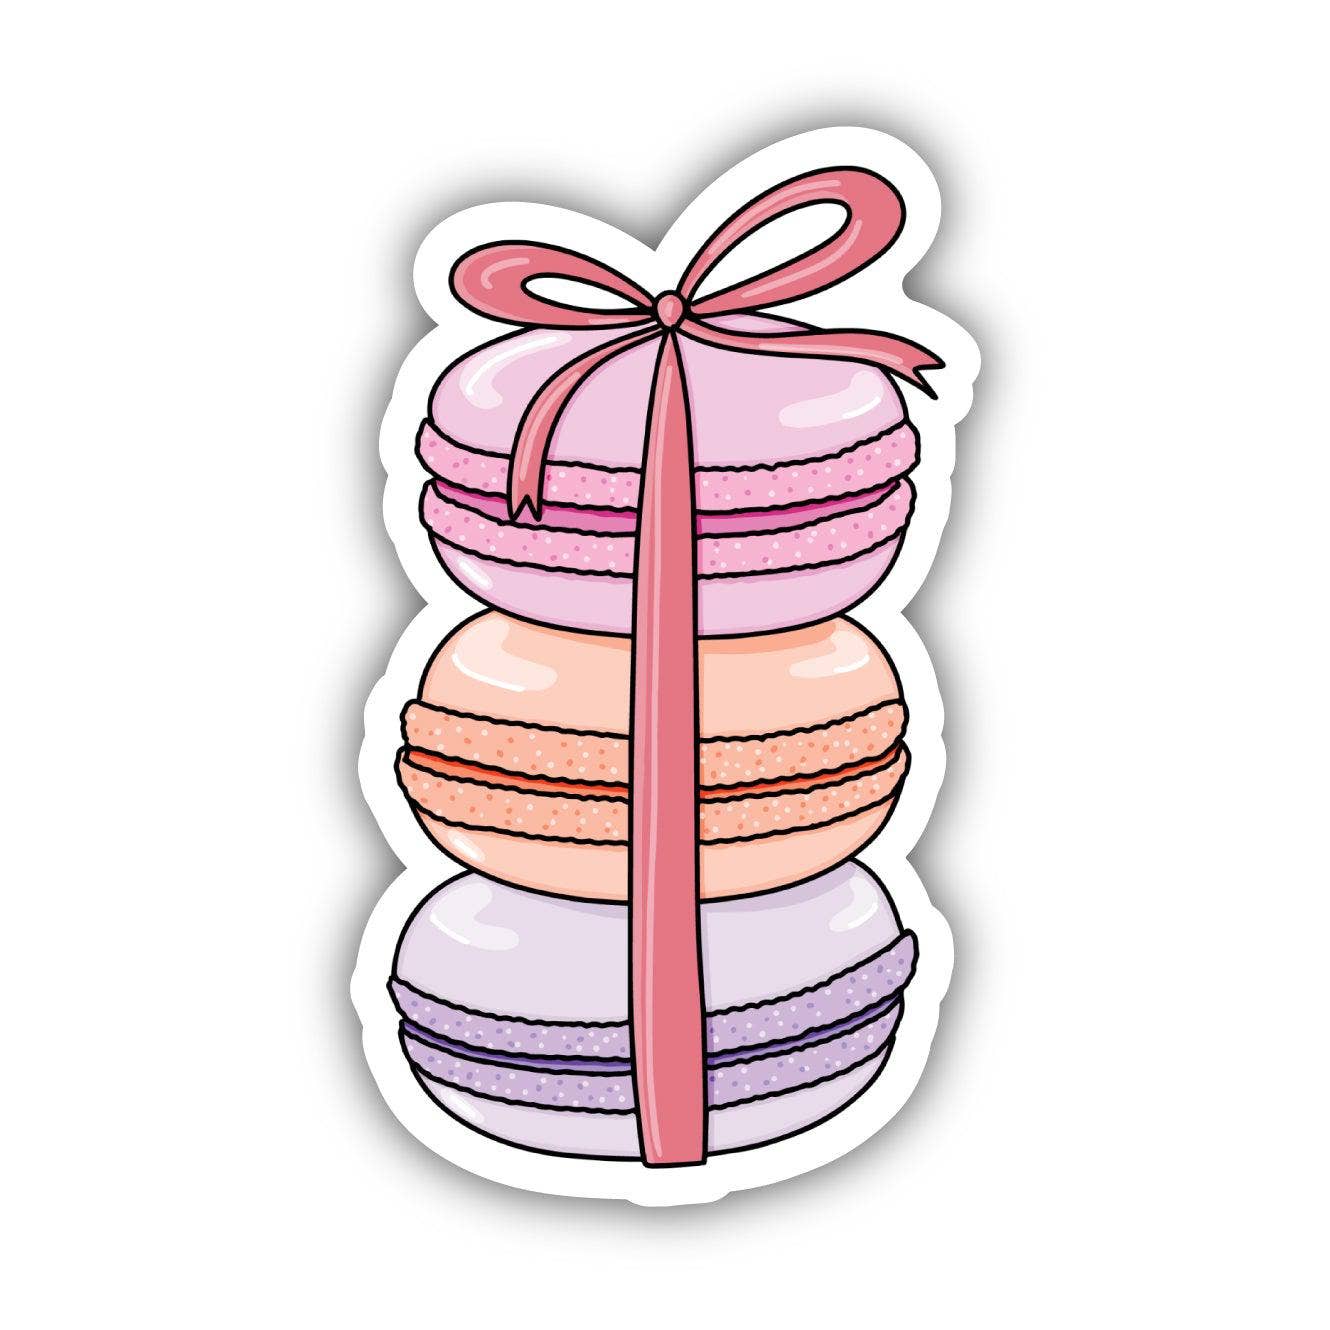 Macarons With A Bow Sticker